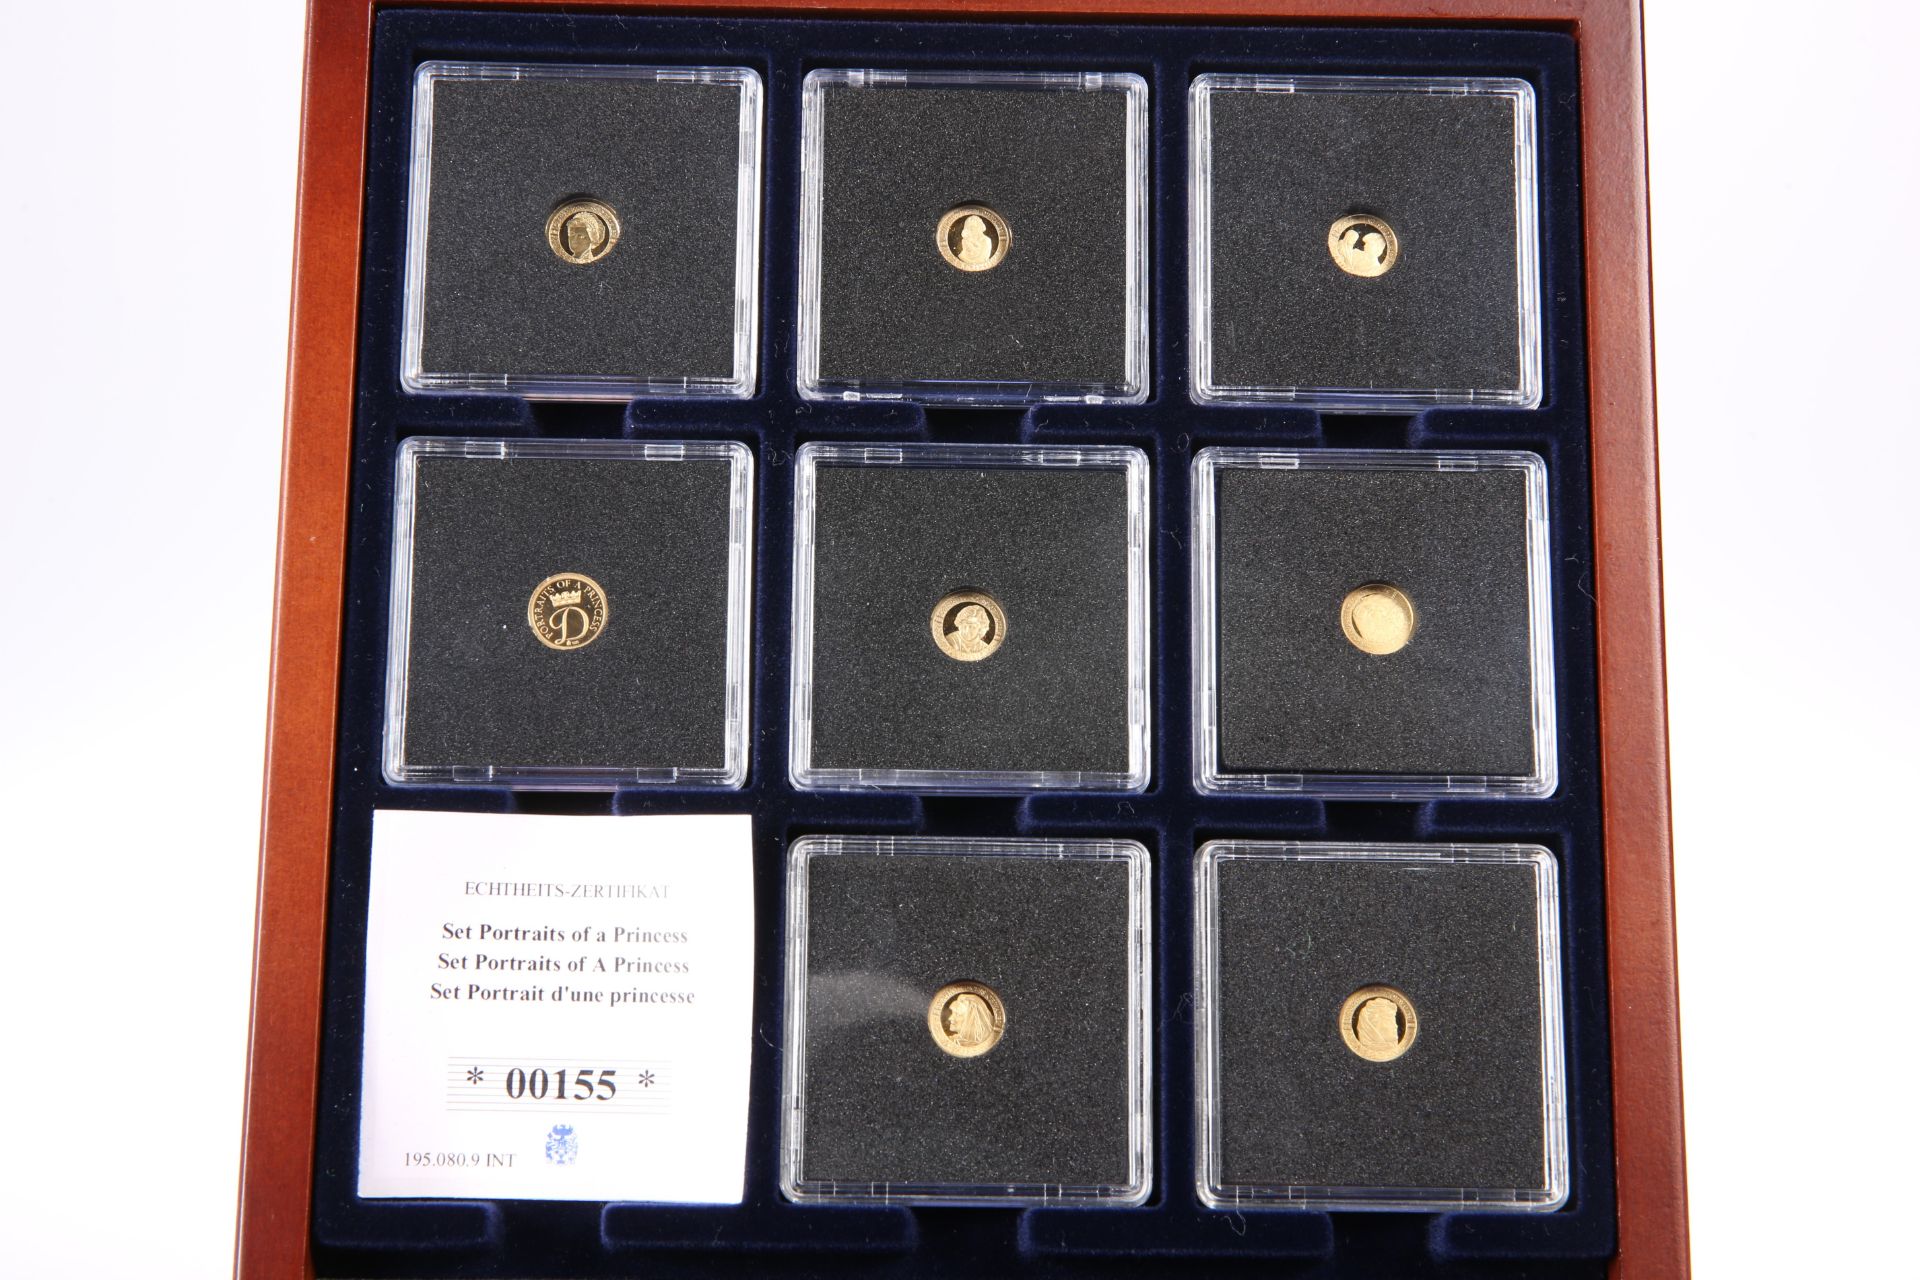 "PORTRAITS OF A PRINCESS", A COLLECTION OF EIGHT 14 CARAT GOLD COINS, each proof struck with a